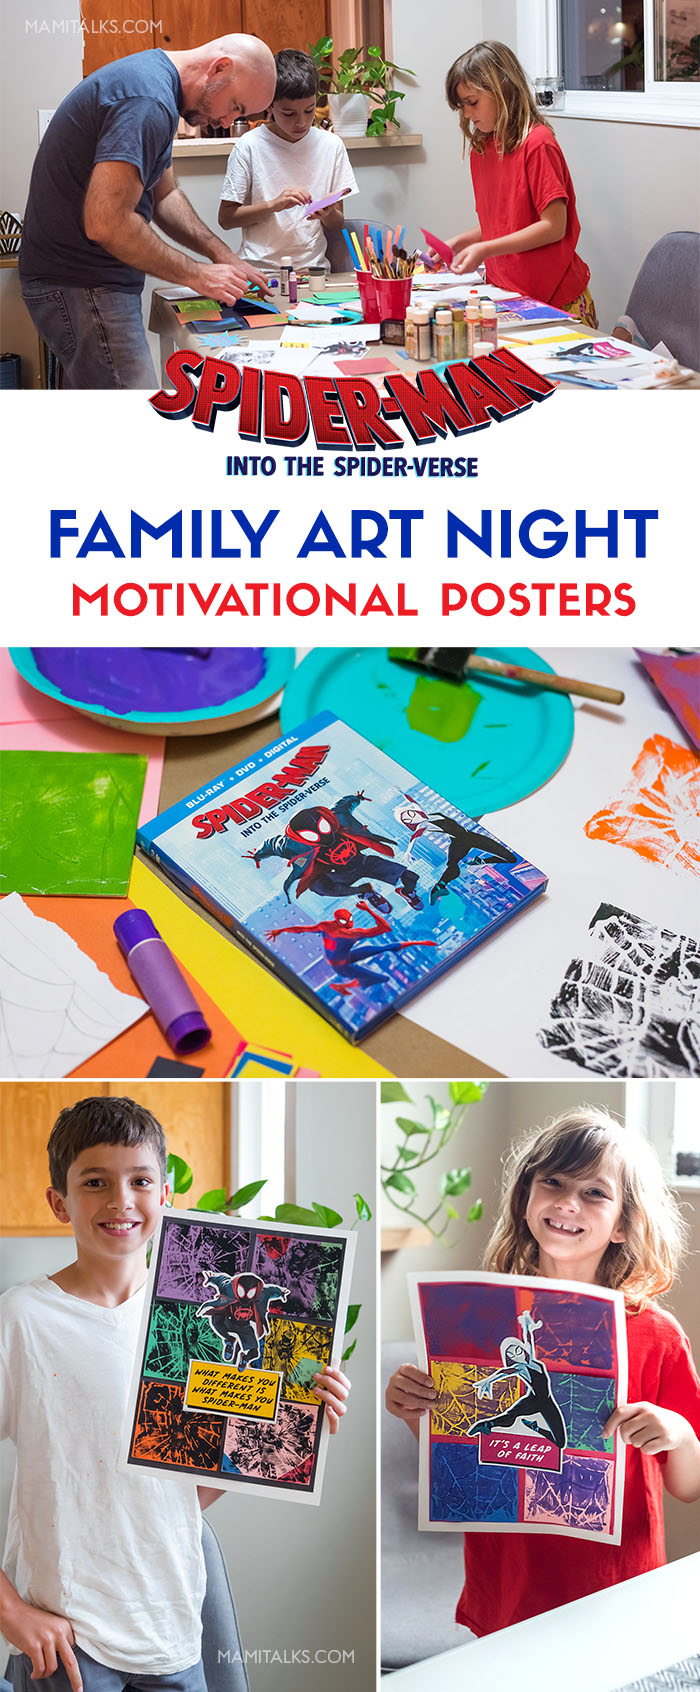 Family working together in Art Night based on Spider-Verse movie. -MamiTalks.com